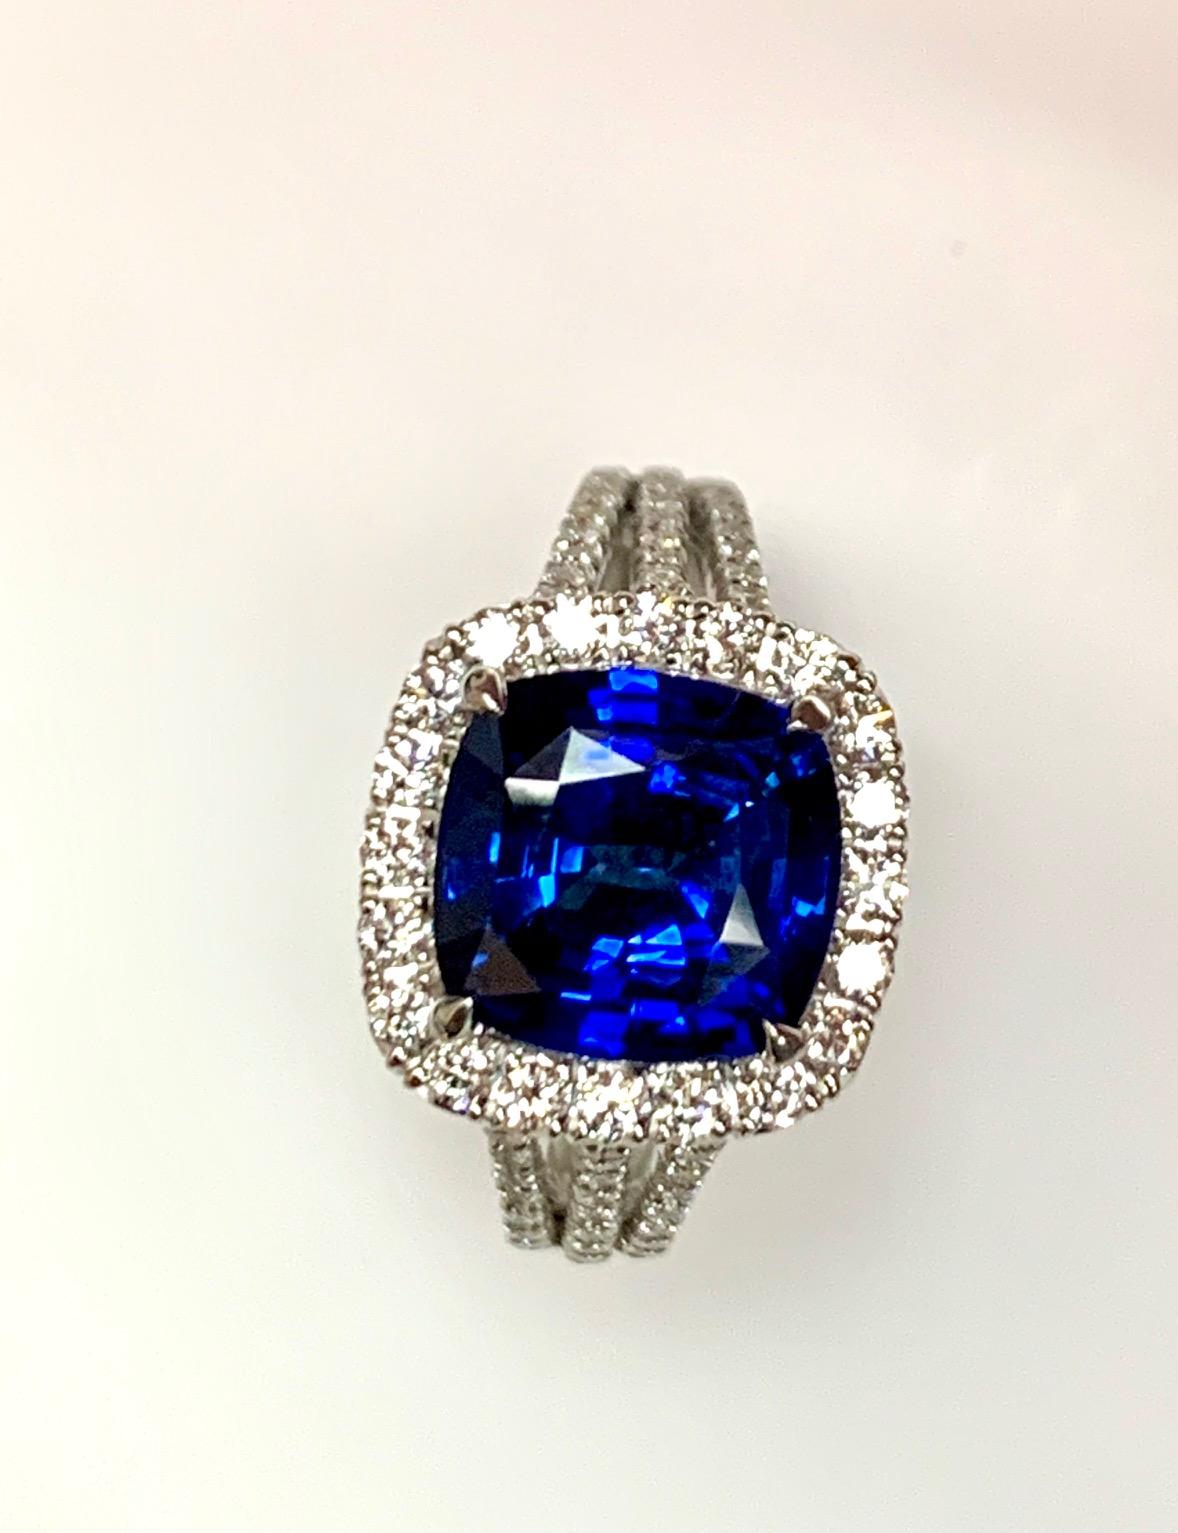 Modern CDC LAB Certified 4.11 Carat Cushion Royal Blue Sapphire Diamond Cocktail Ring For Sale